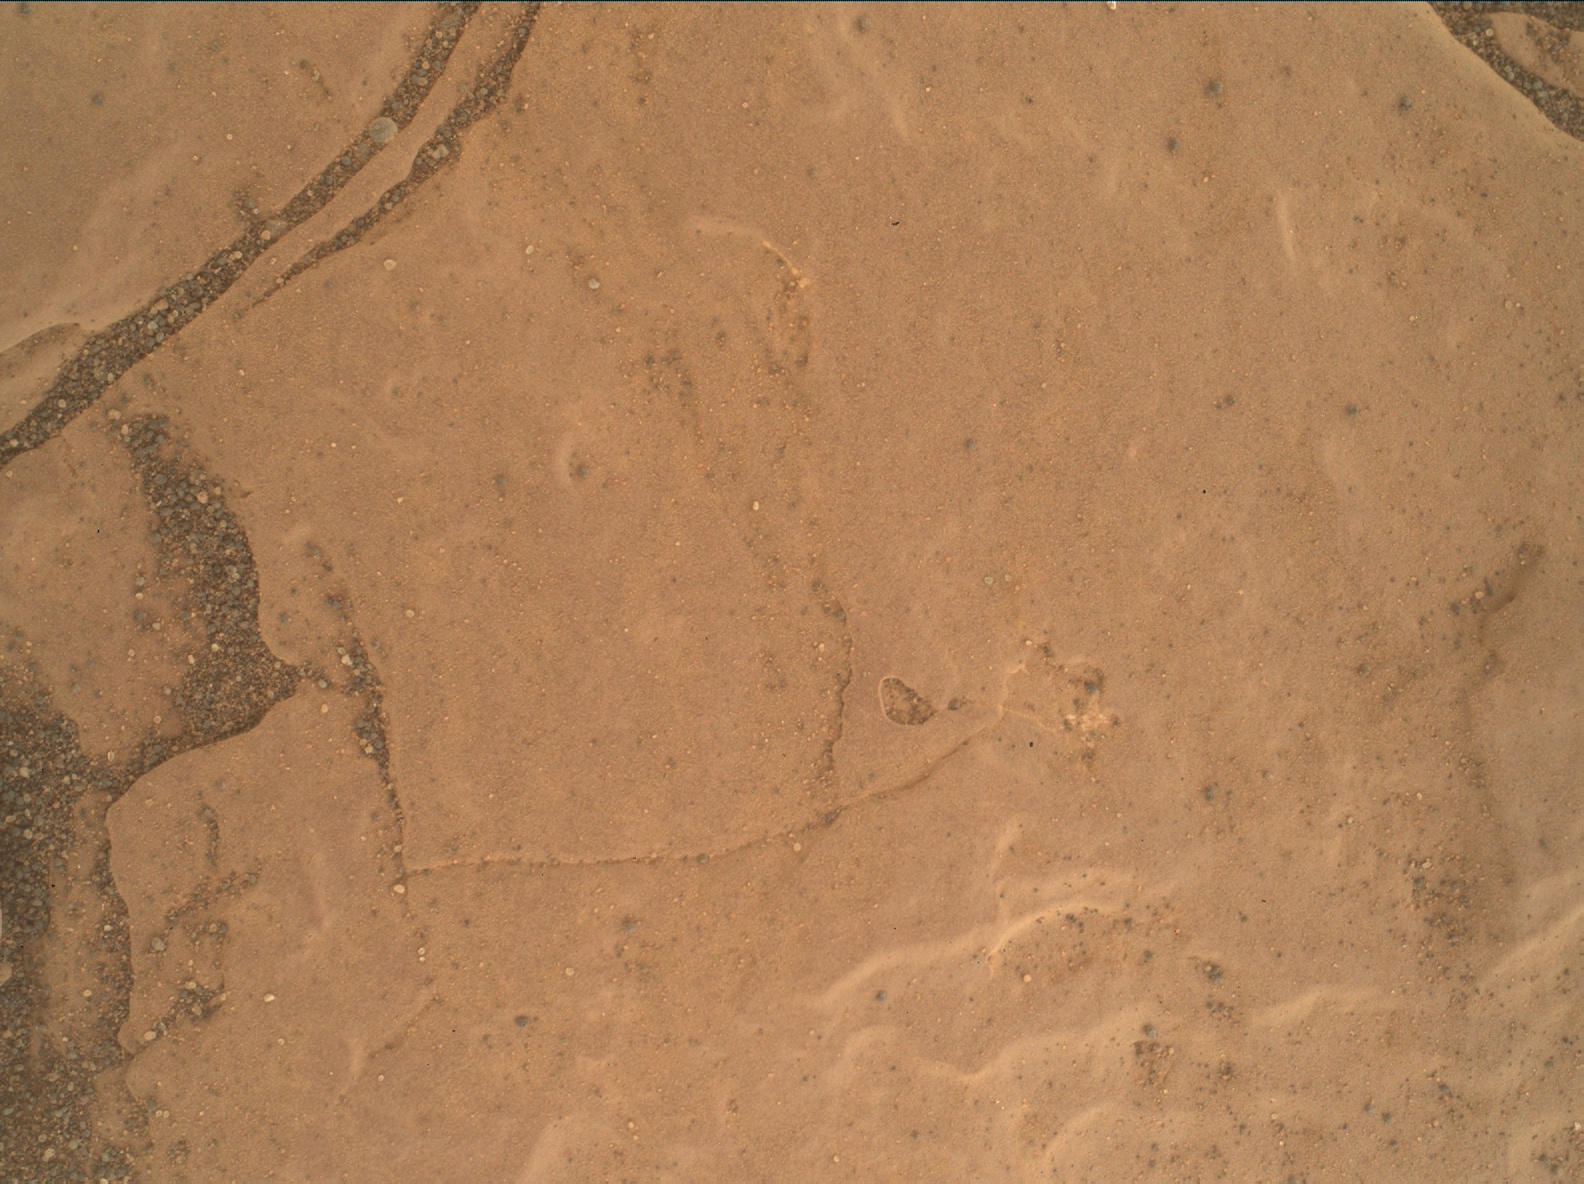 Nasa's Mars rover Curiosity acquired this image using its Mars Hand Lens Imager (MAHLI) on Sol 2408